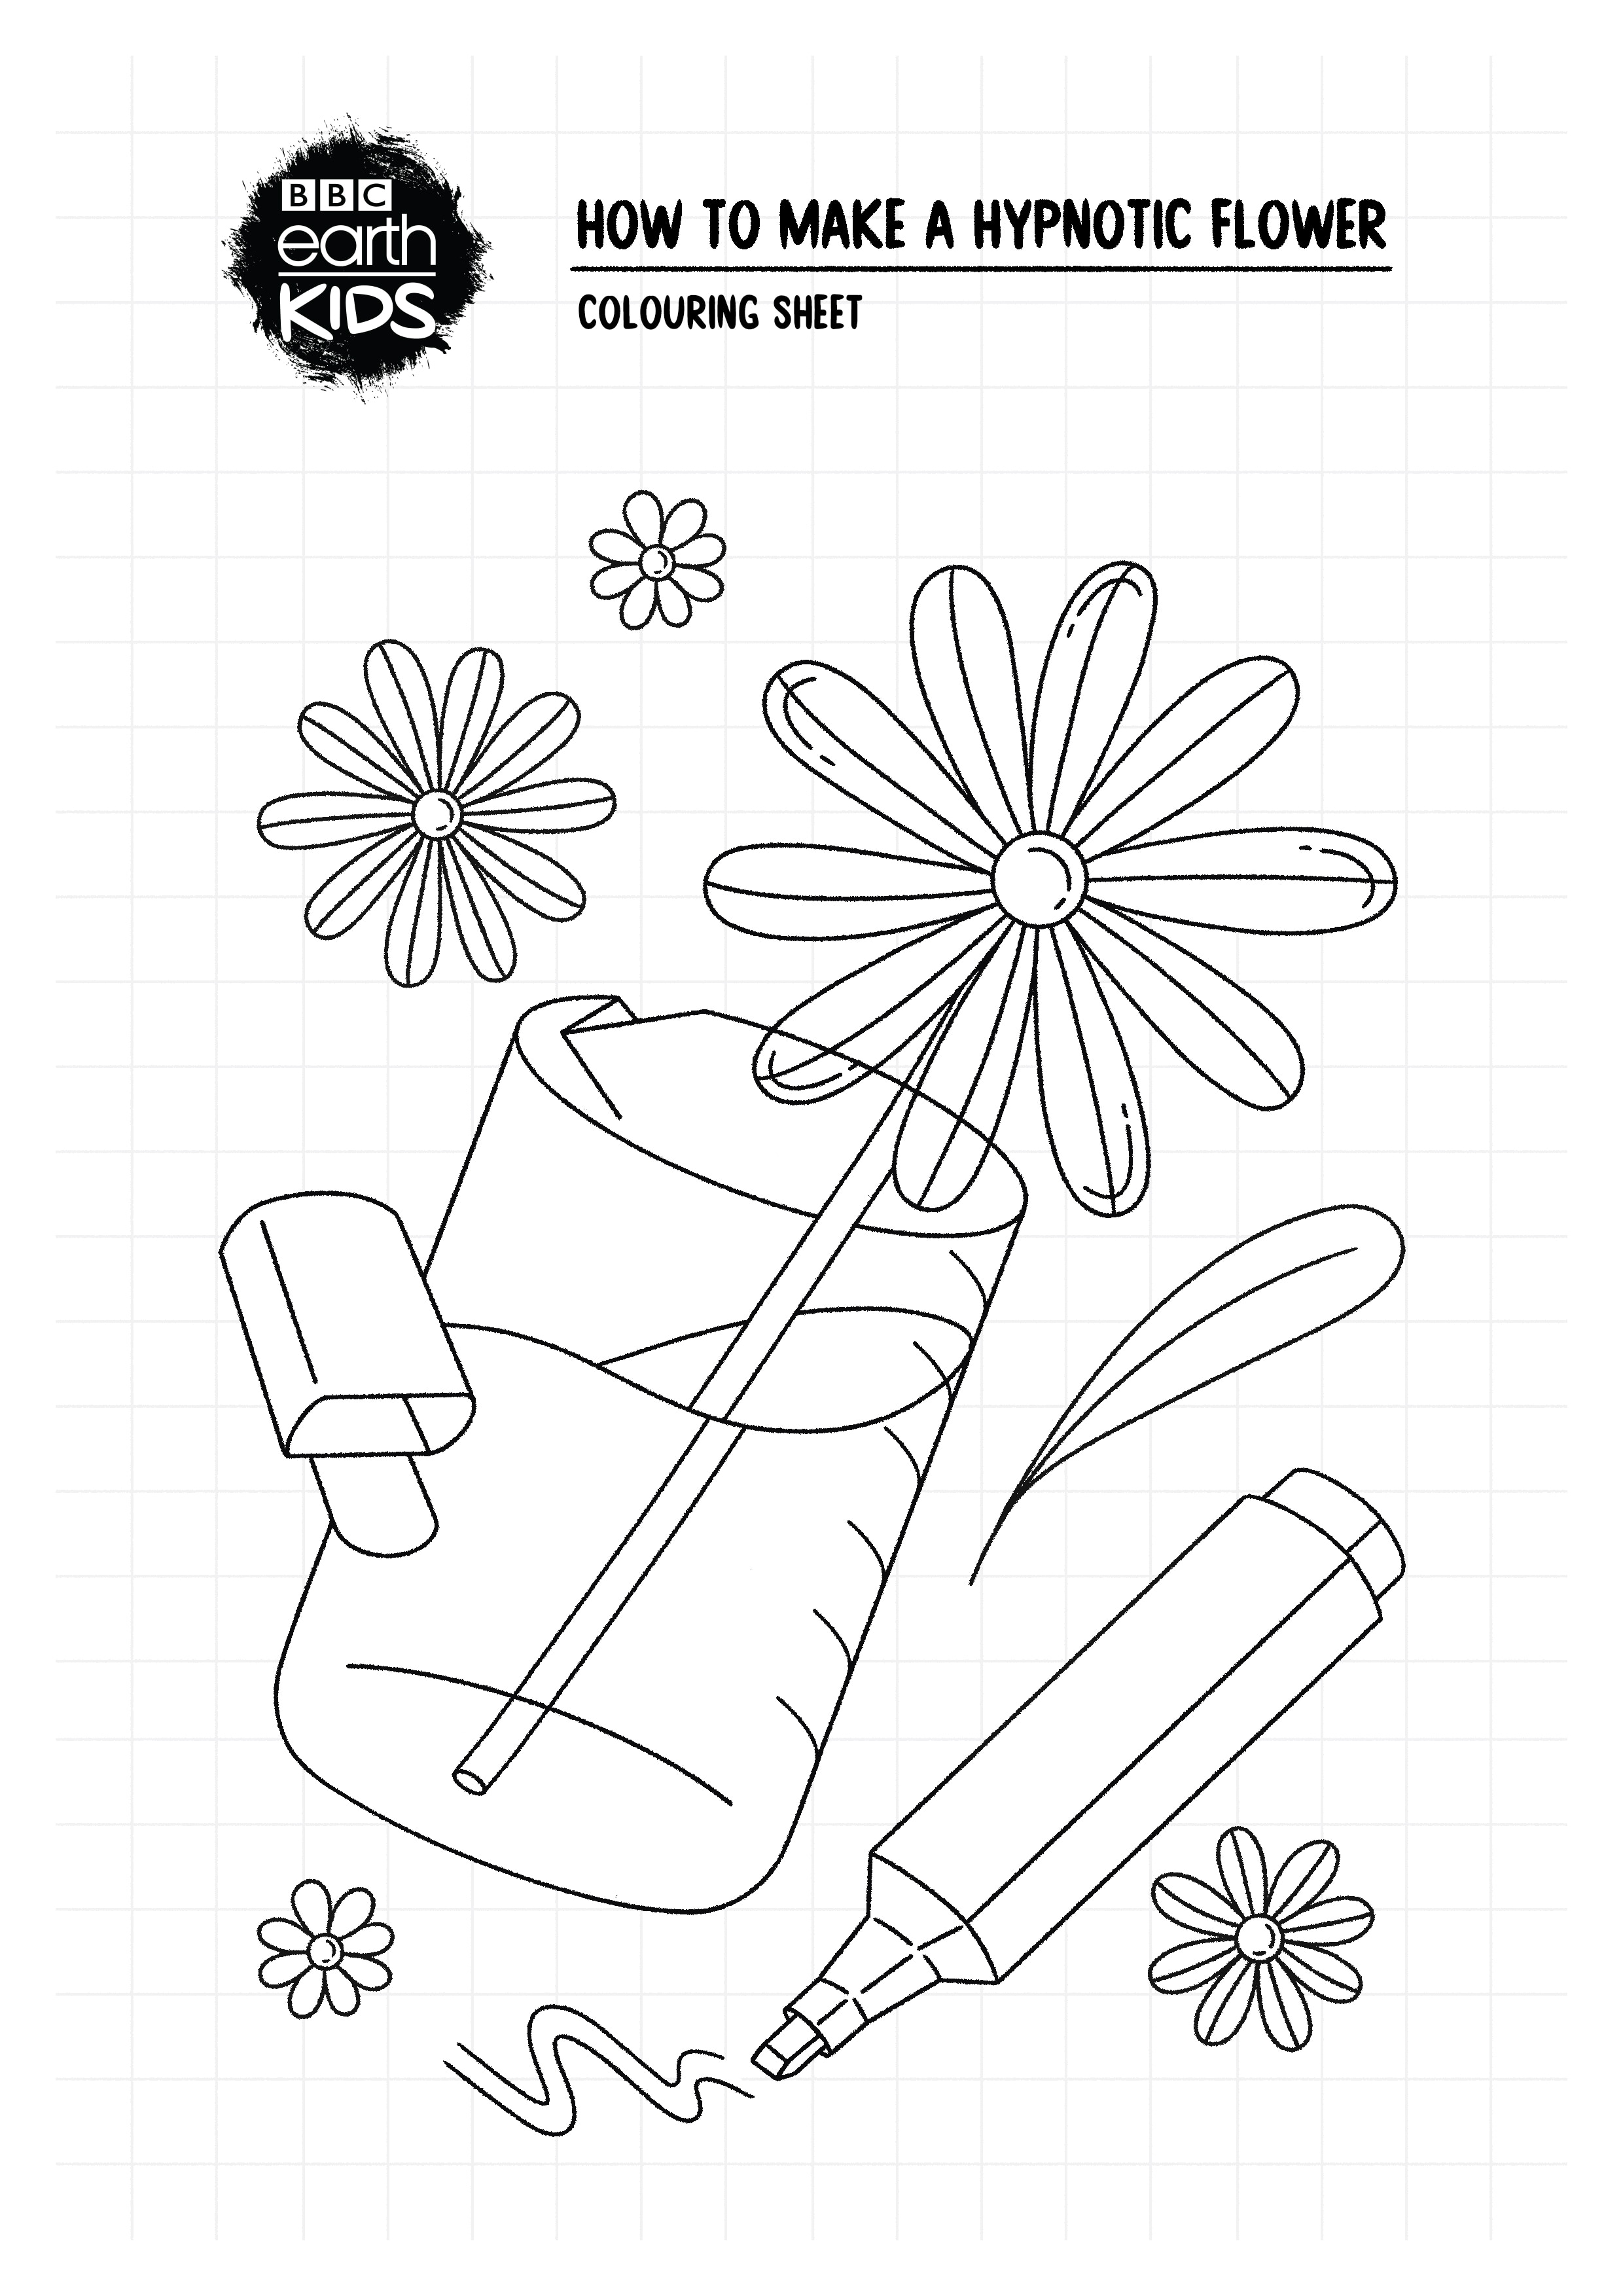 Colouring sheet for a hypnotic flower 